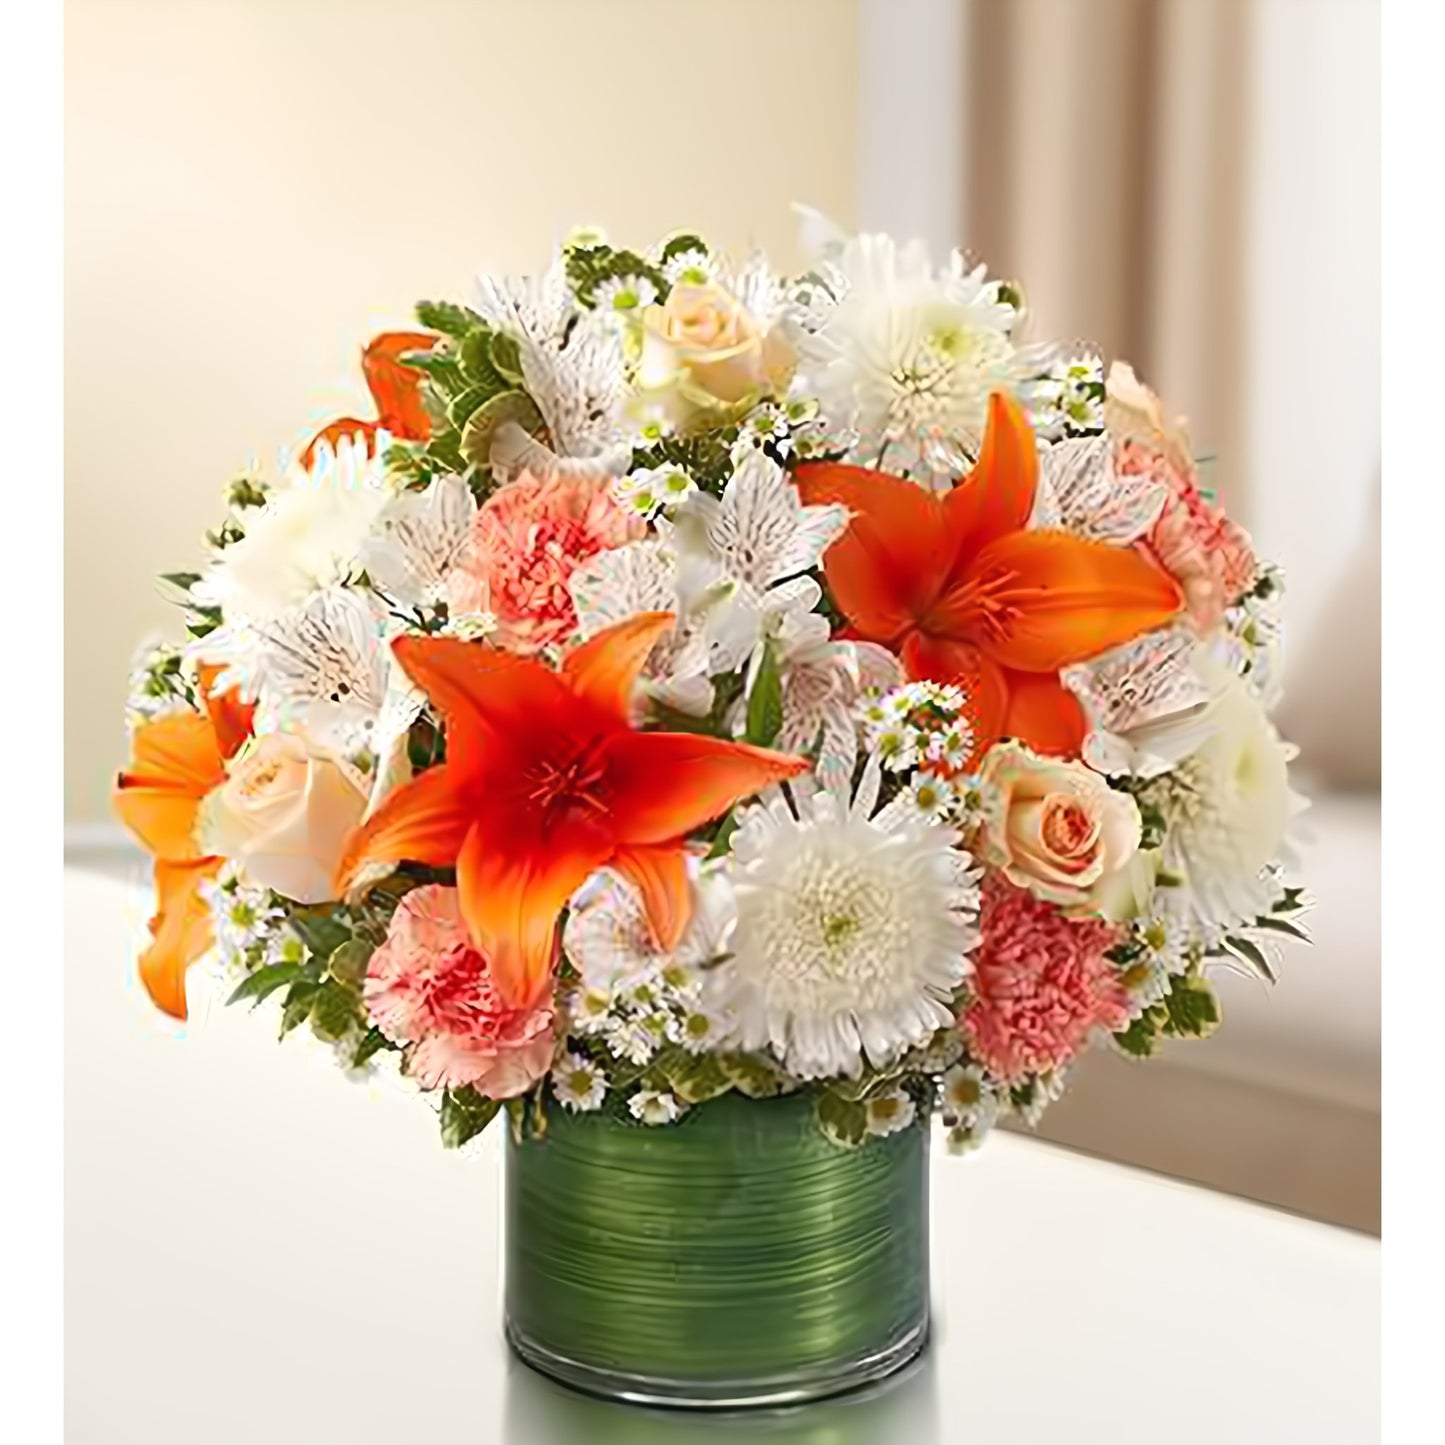 Cherished Memories - Peach, Orange and White - Floral Arrangement - Flower Delivery Brooklyn